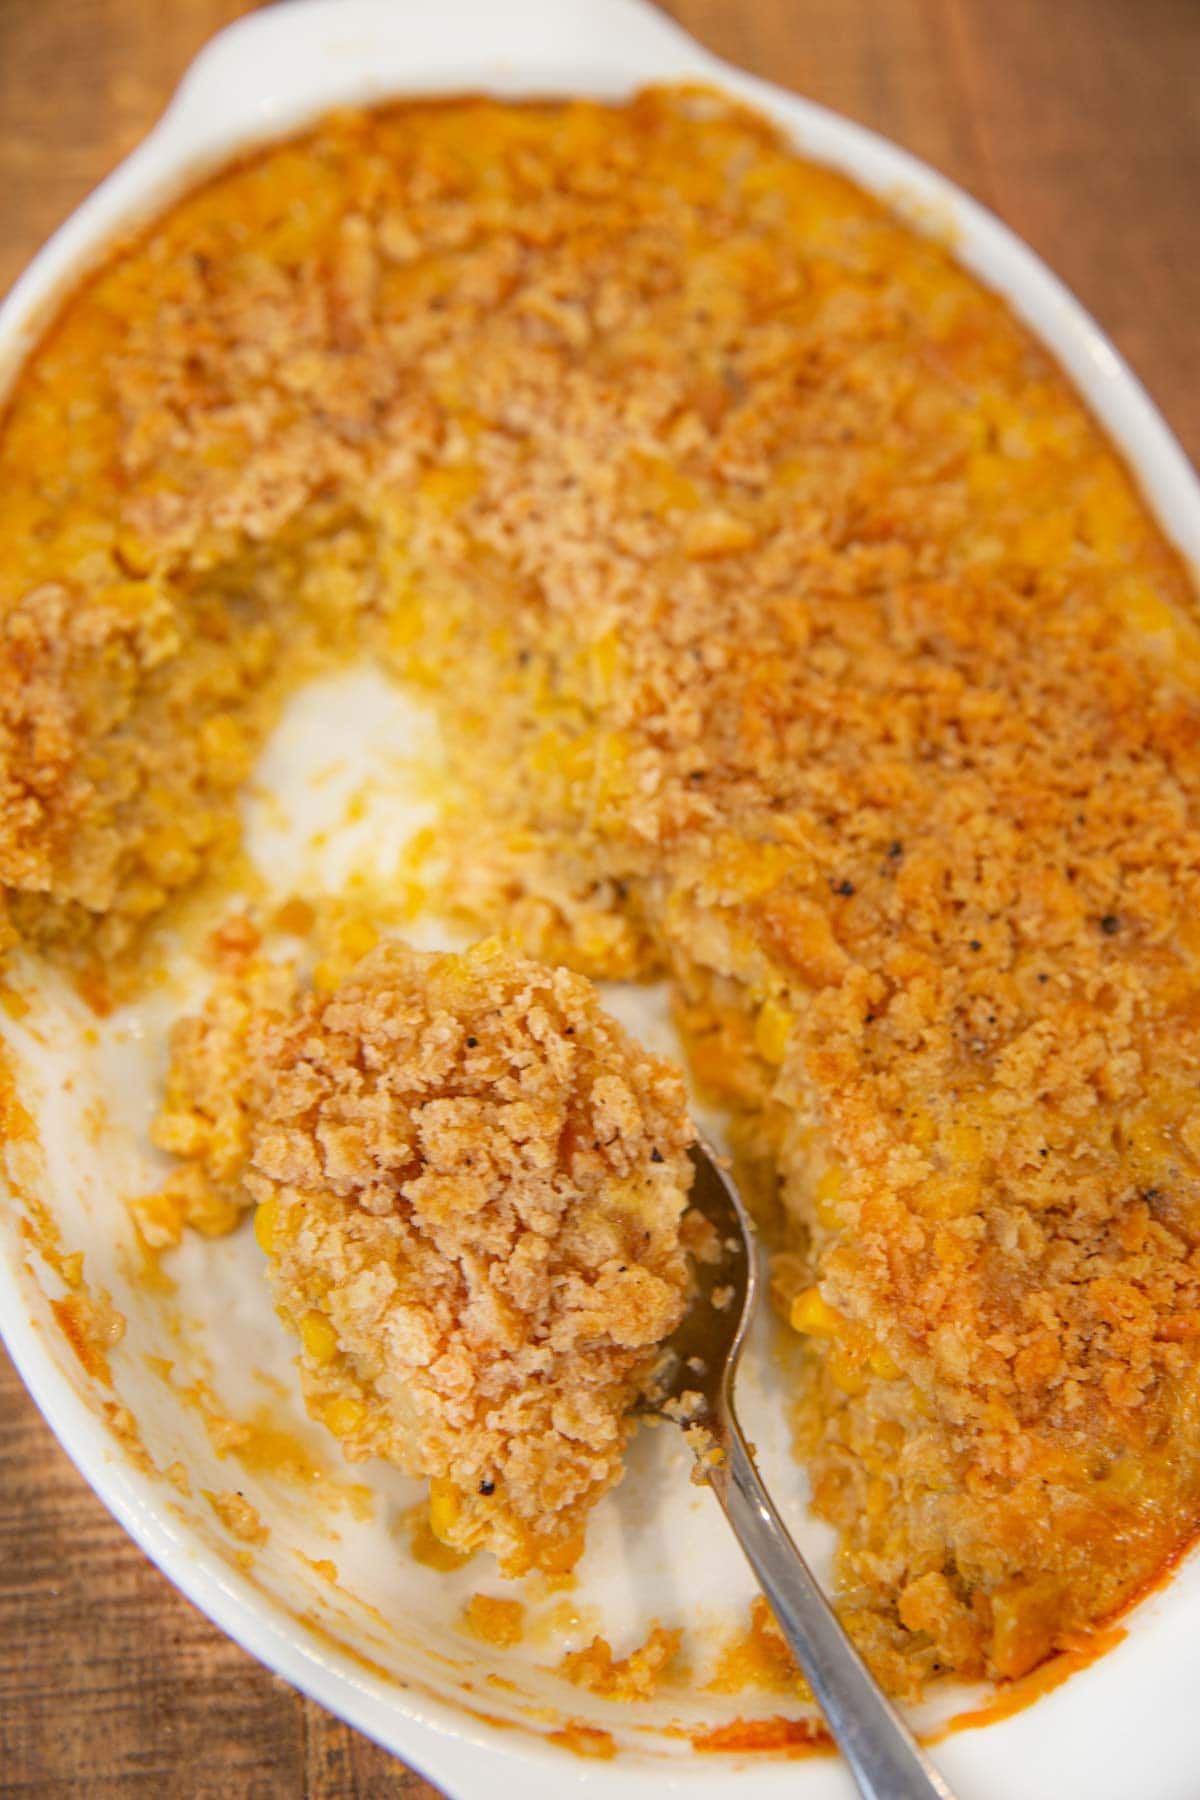 Baking pan of Scalloped Corn with spoon